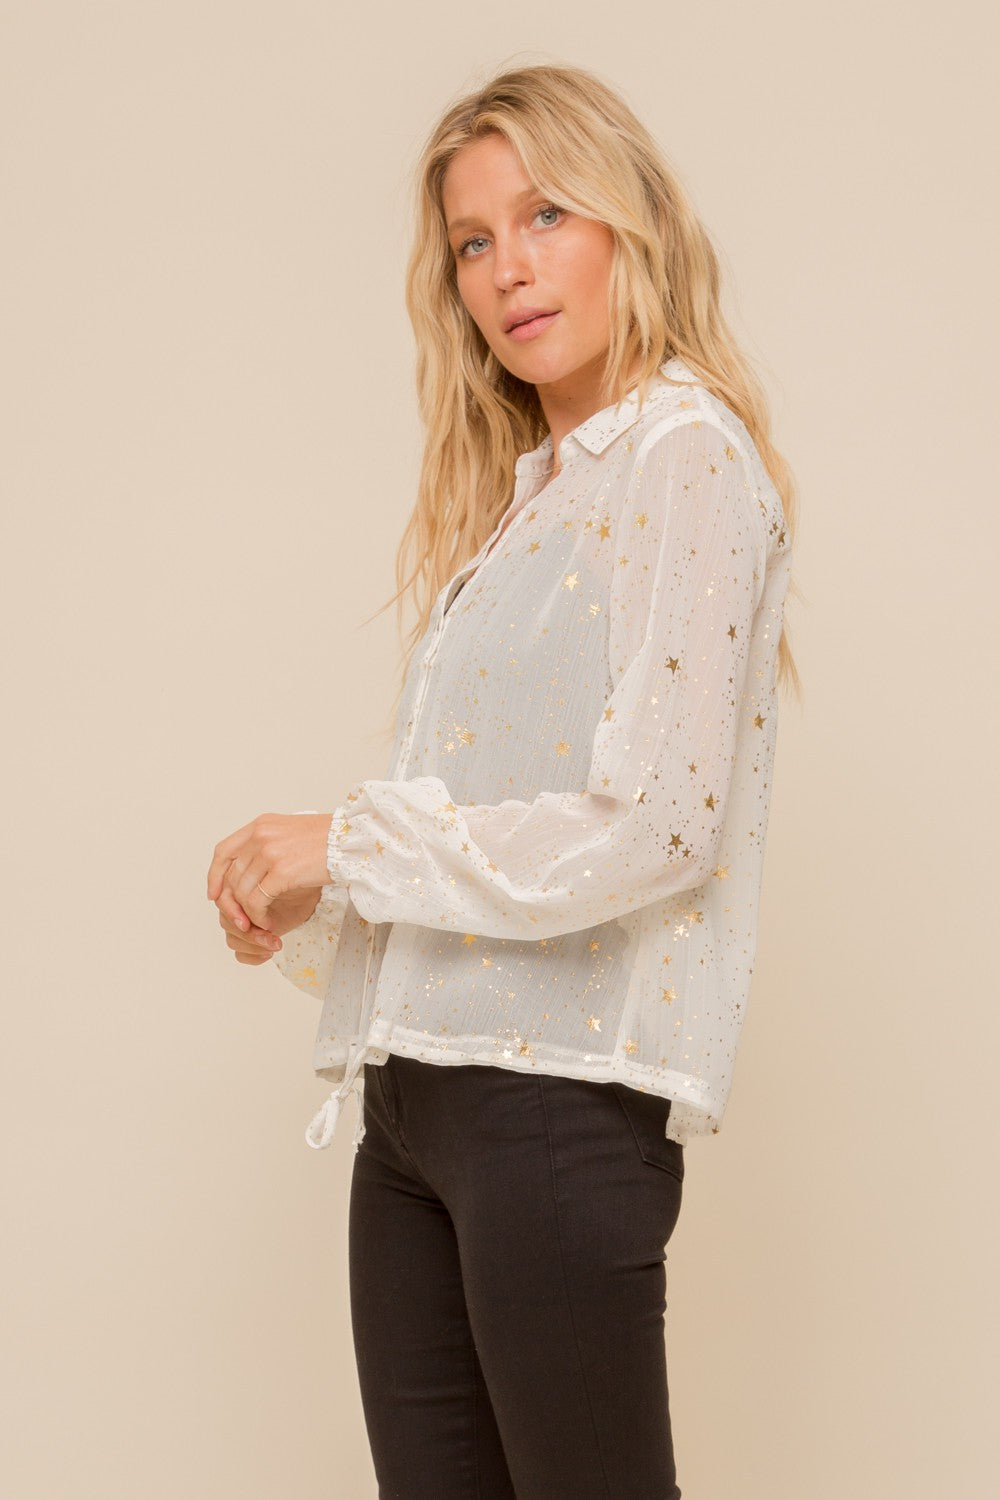 Gold Foil Star Button Up Ivory